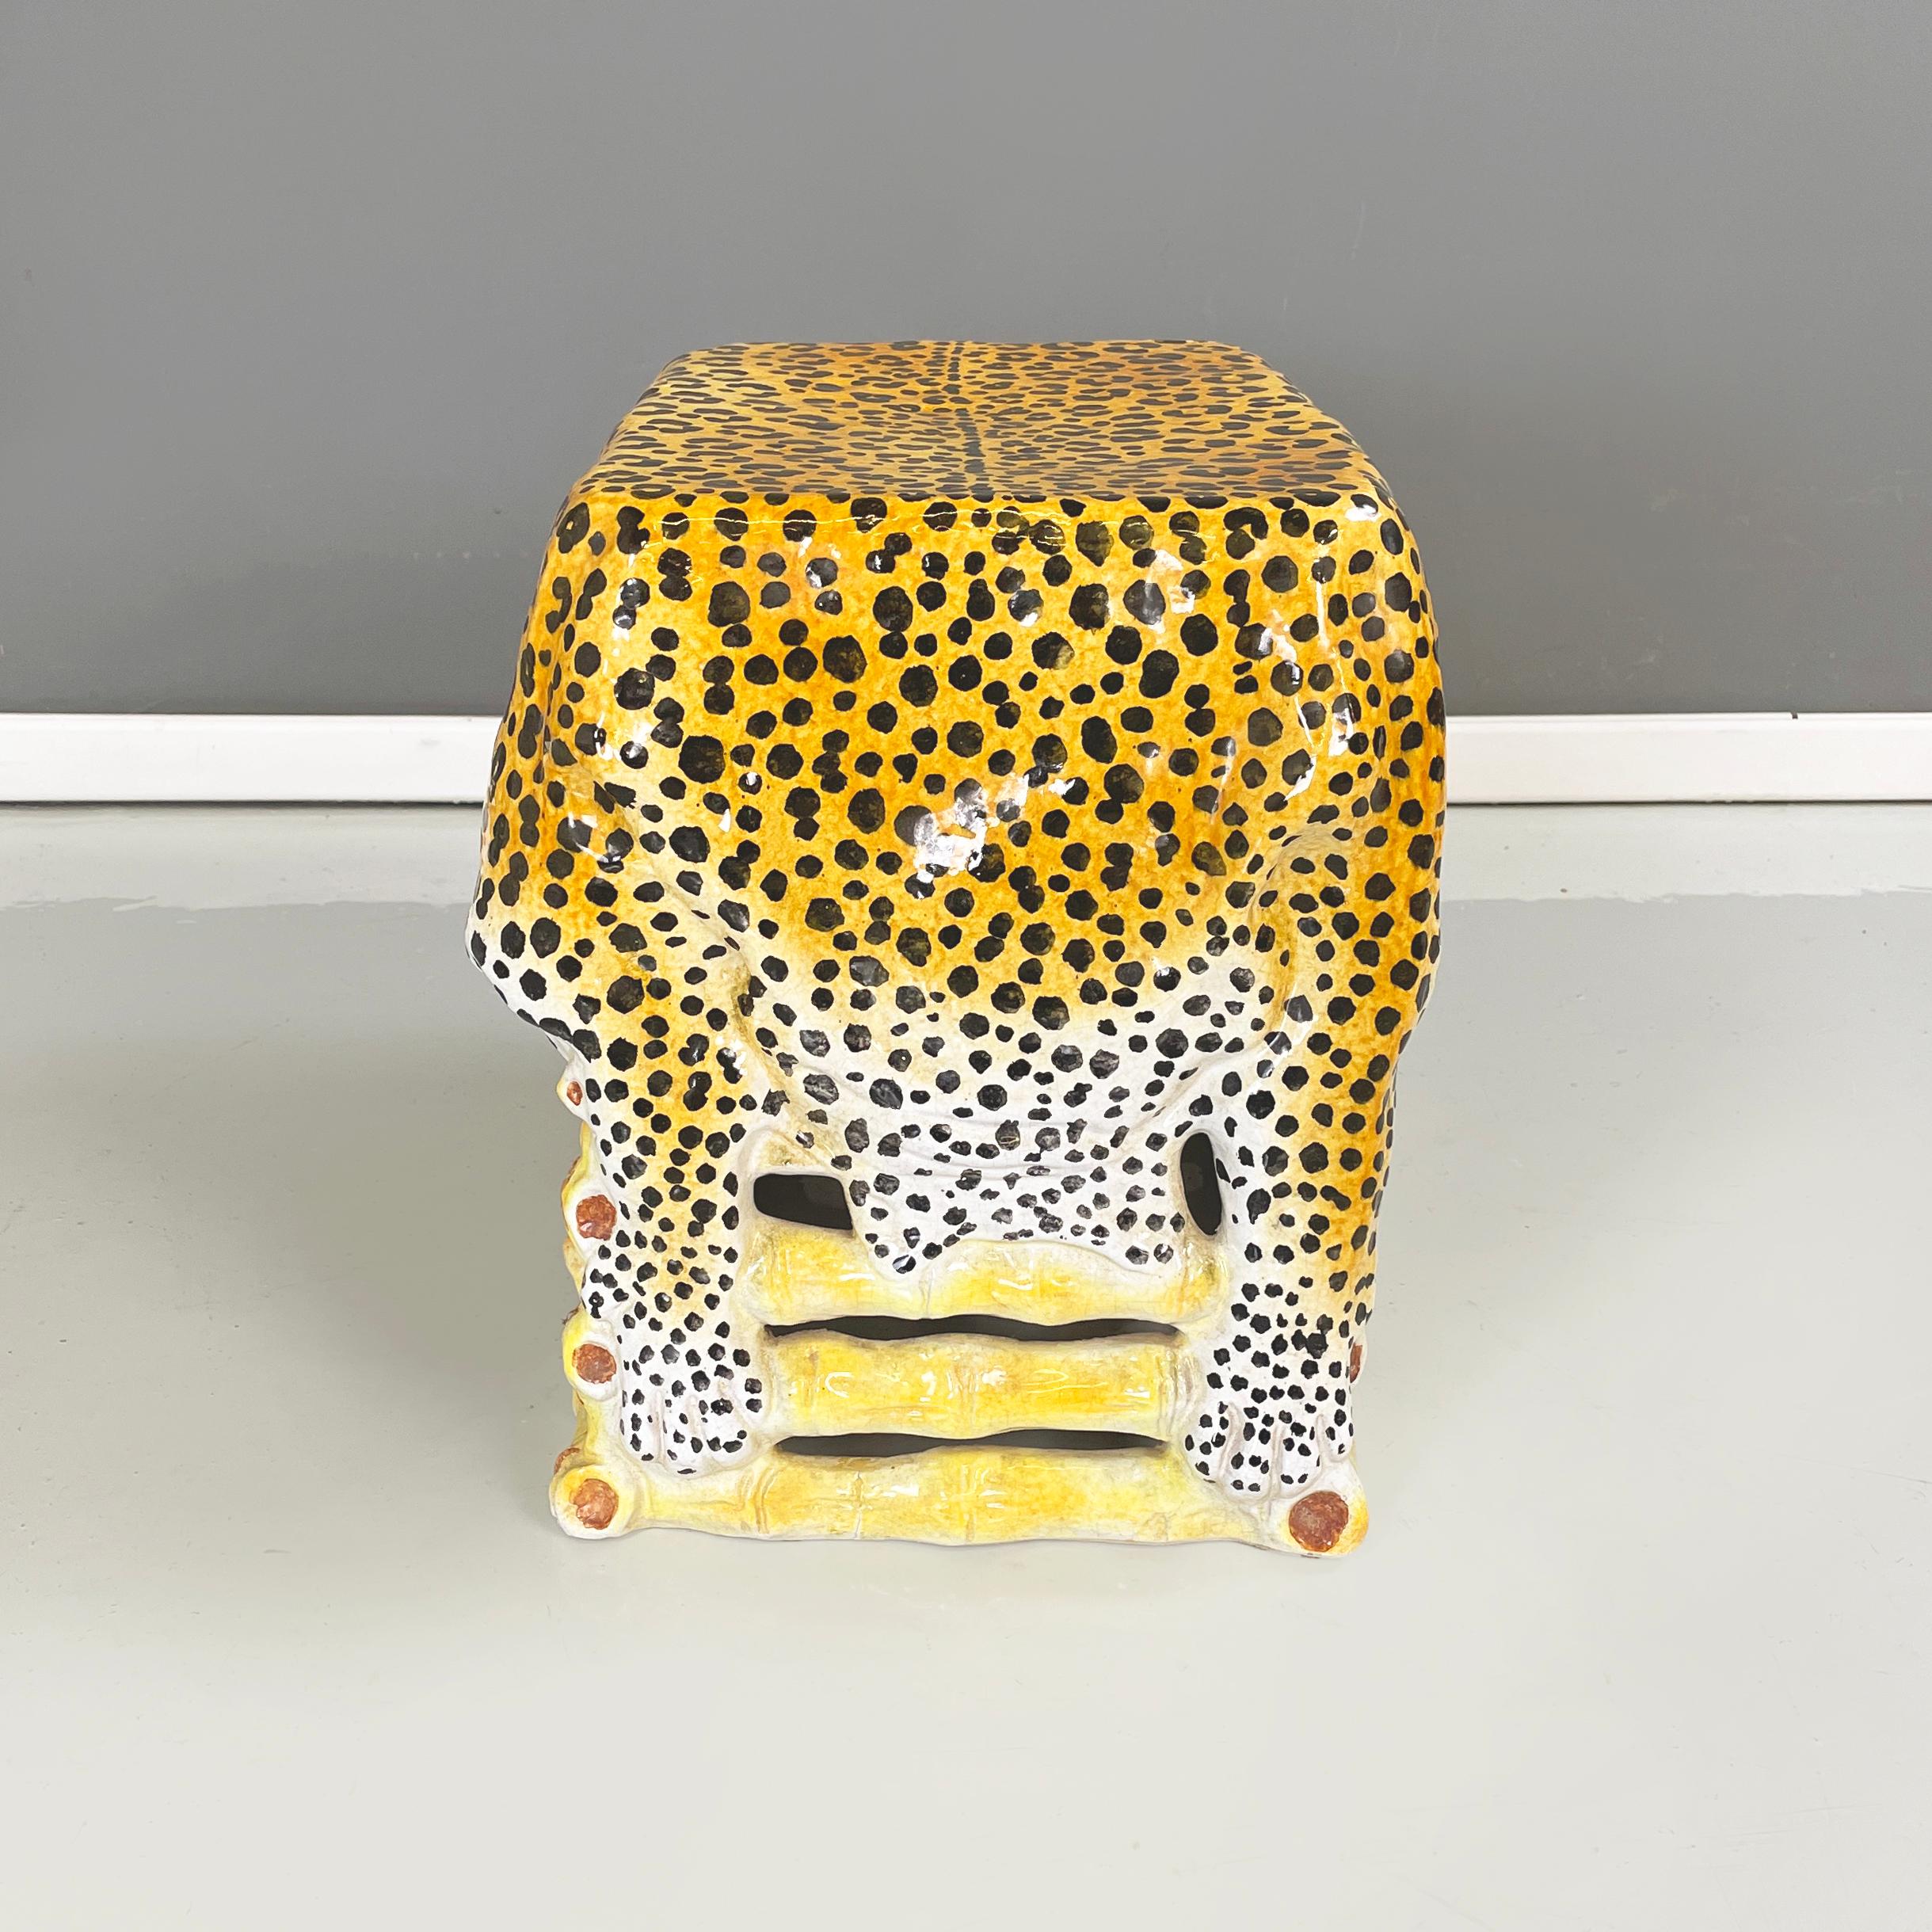 Italian mid-century modern Glazed terracotta coffe table of bamboo stool with leopard skin, 1960s
Coffee table entirely in glazed terracotta. The coffee table takes the shape of a bamboo stool with a leopard skin spread over it. Suitable for outdoor